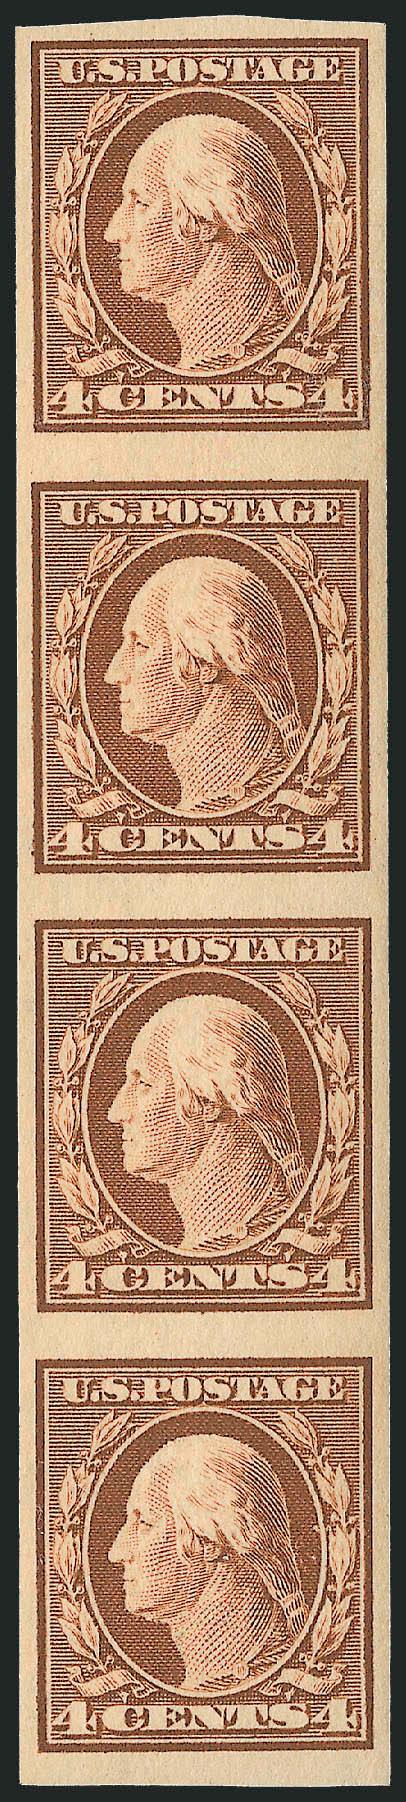 4c Orange Brown, Imperforate Coil (346V).> Strip of four, bottom three stamps Mint N.H., top stamp barest trace of hinging, Extremely Fine, with 1993 (as Mint N.H.) and 2009 P.F. certificates